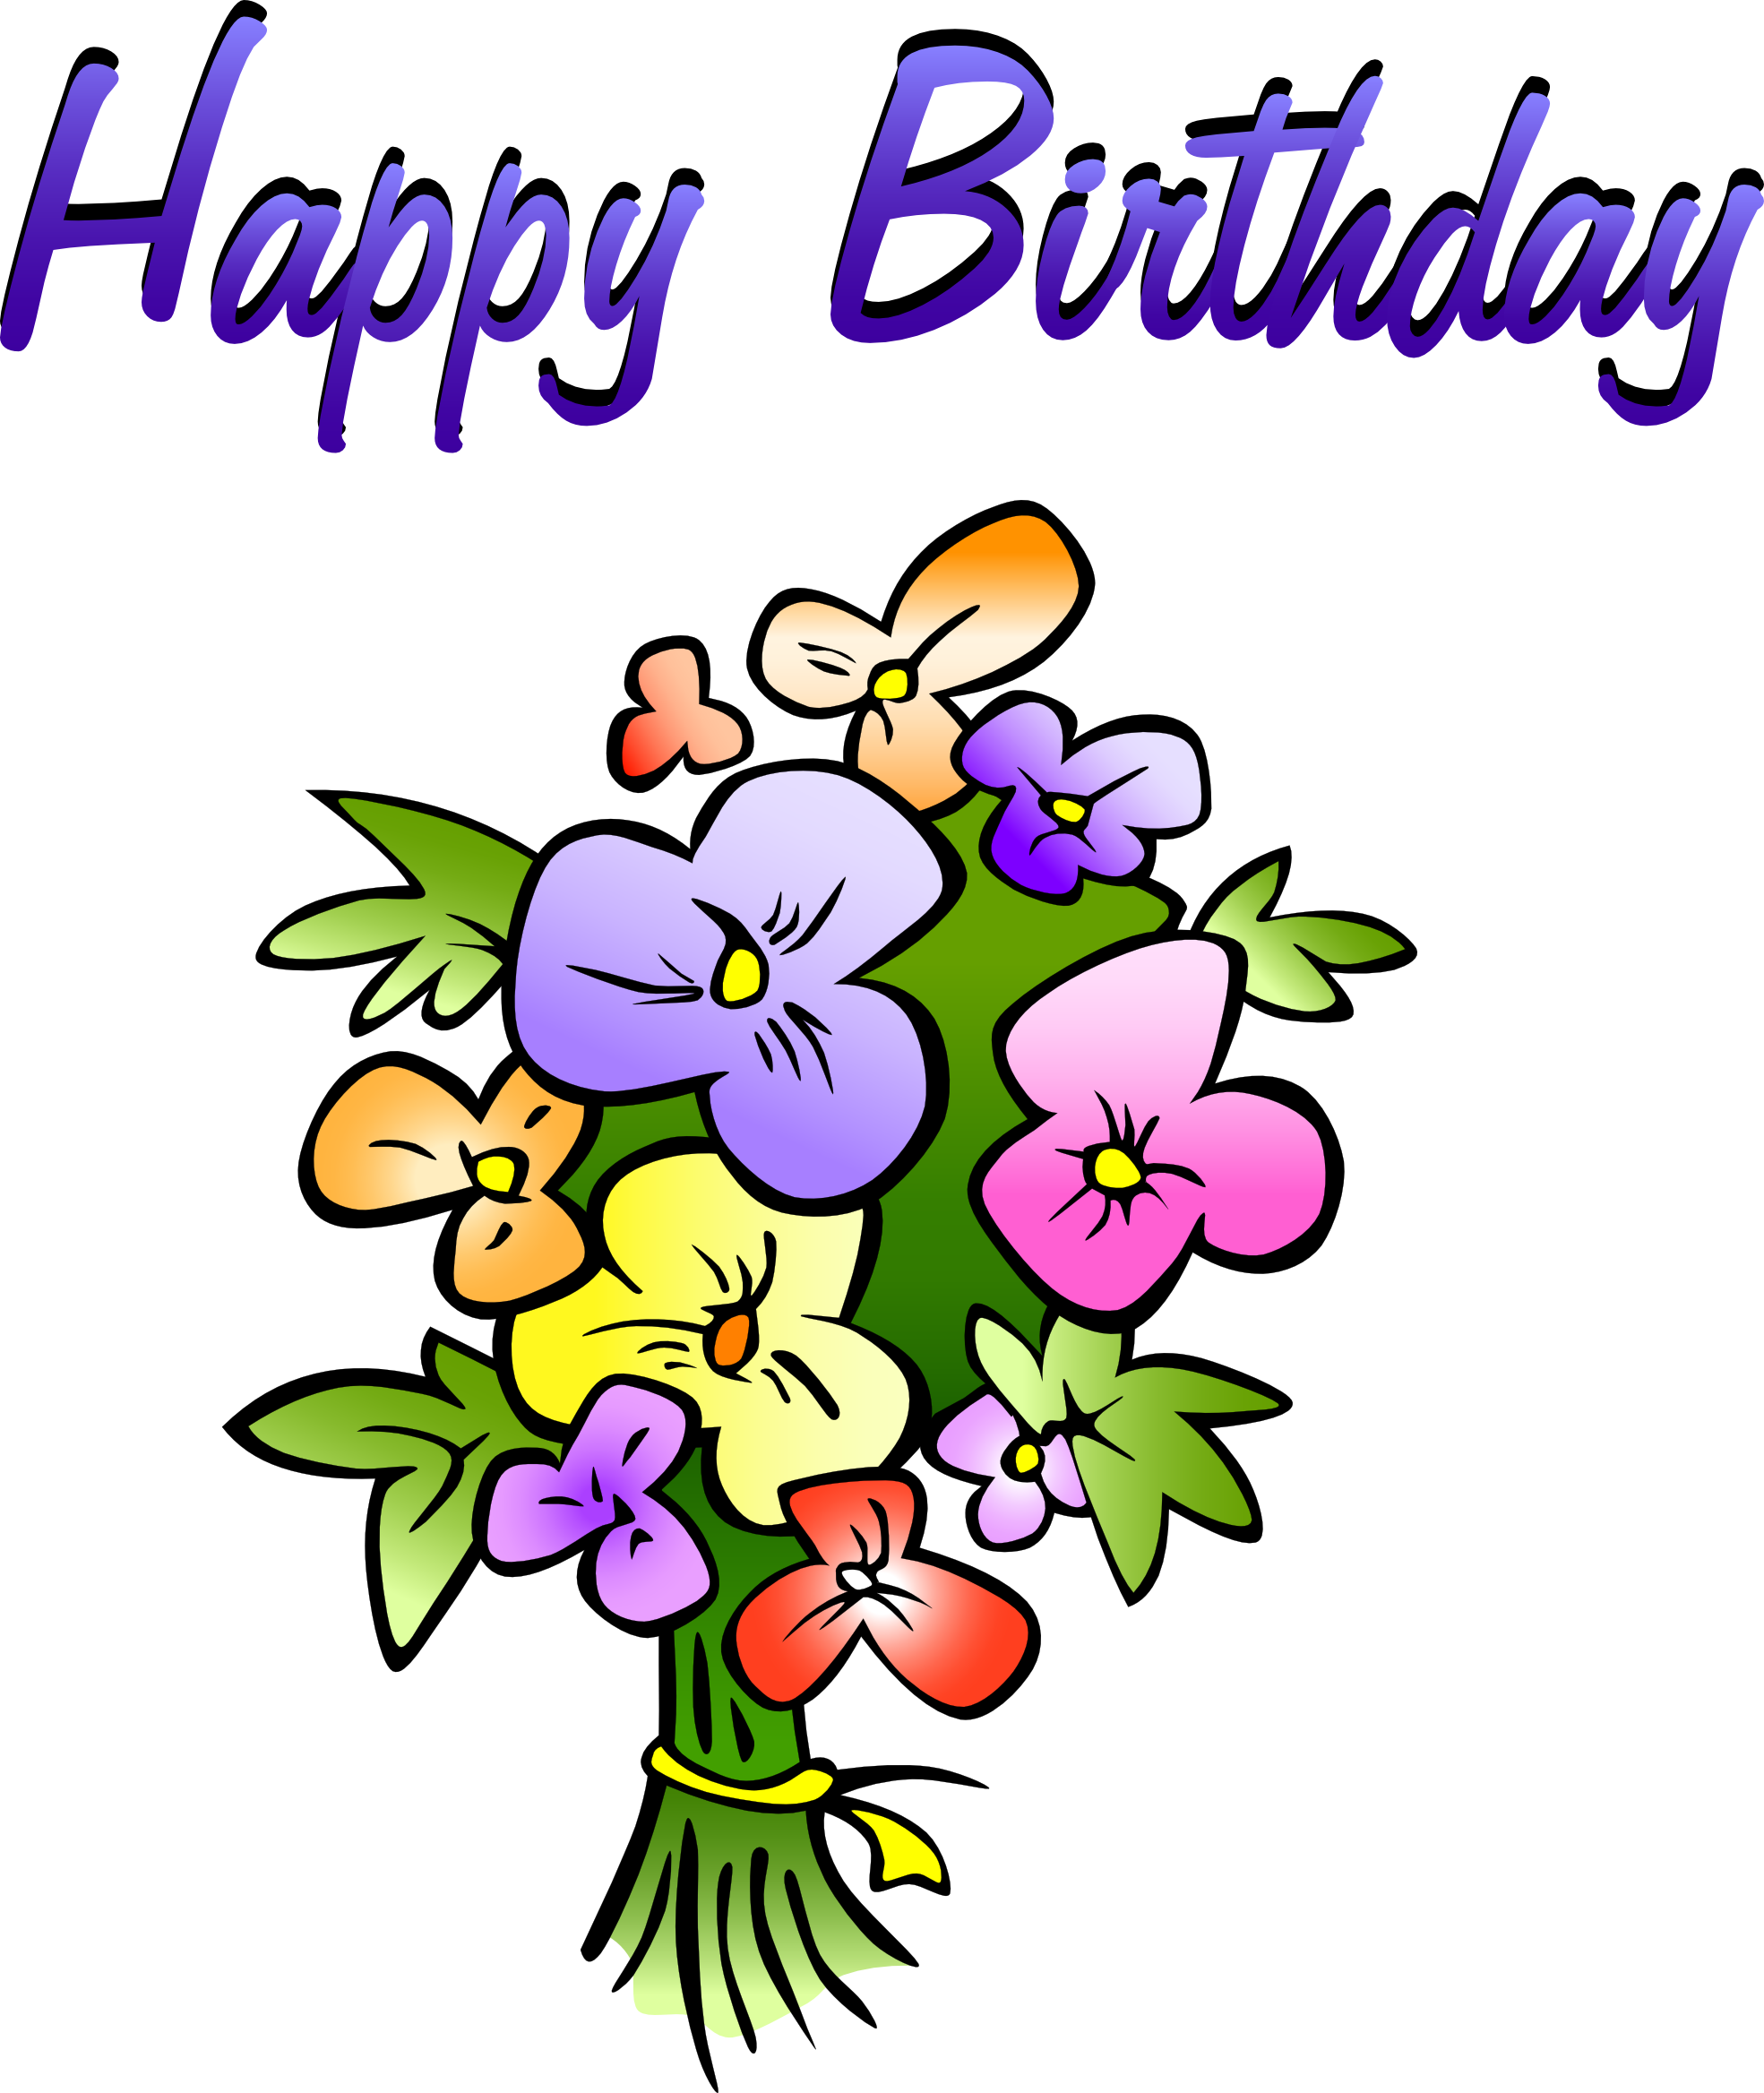 Birthday Flowers Clipart | Clipart Panda - Free Clipart Images